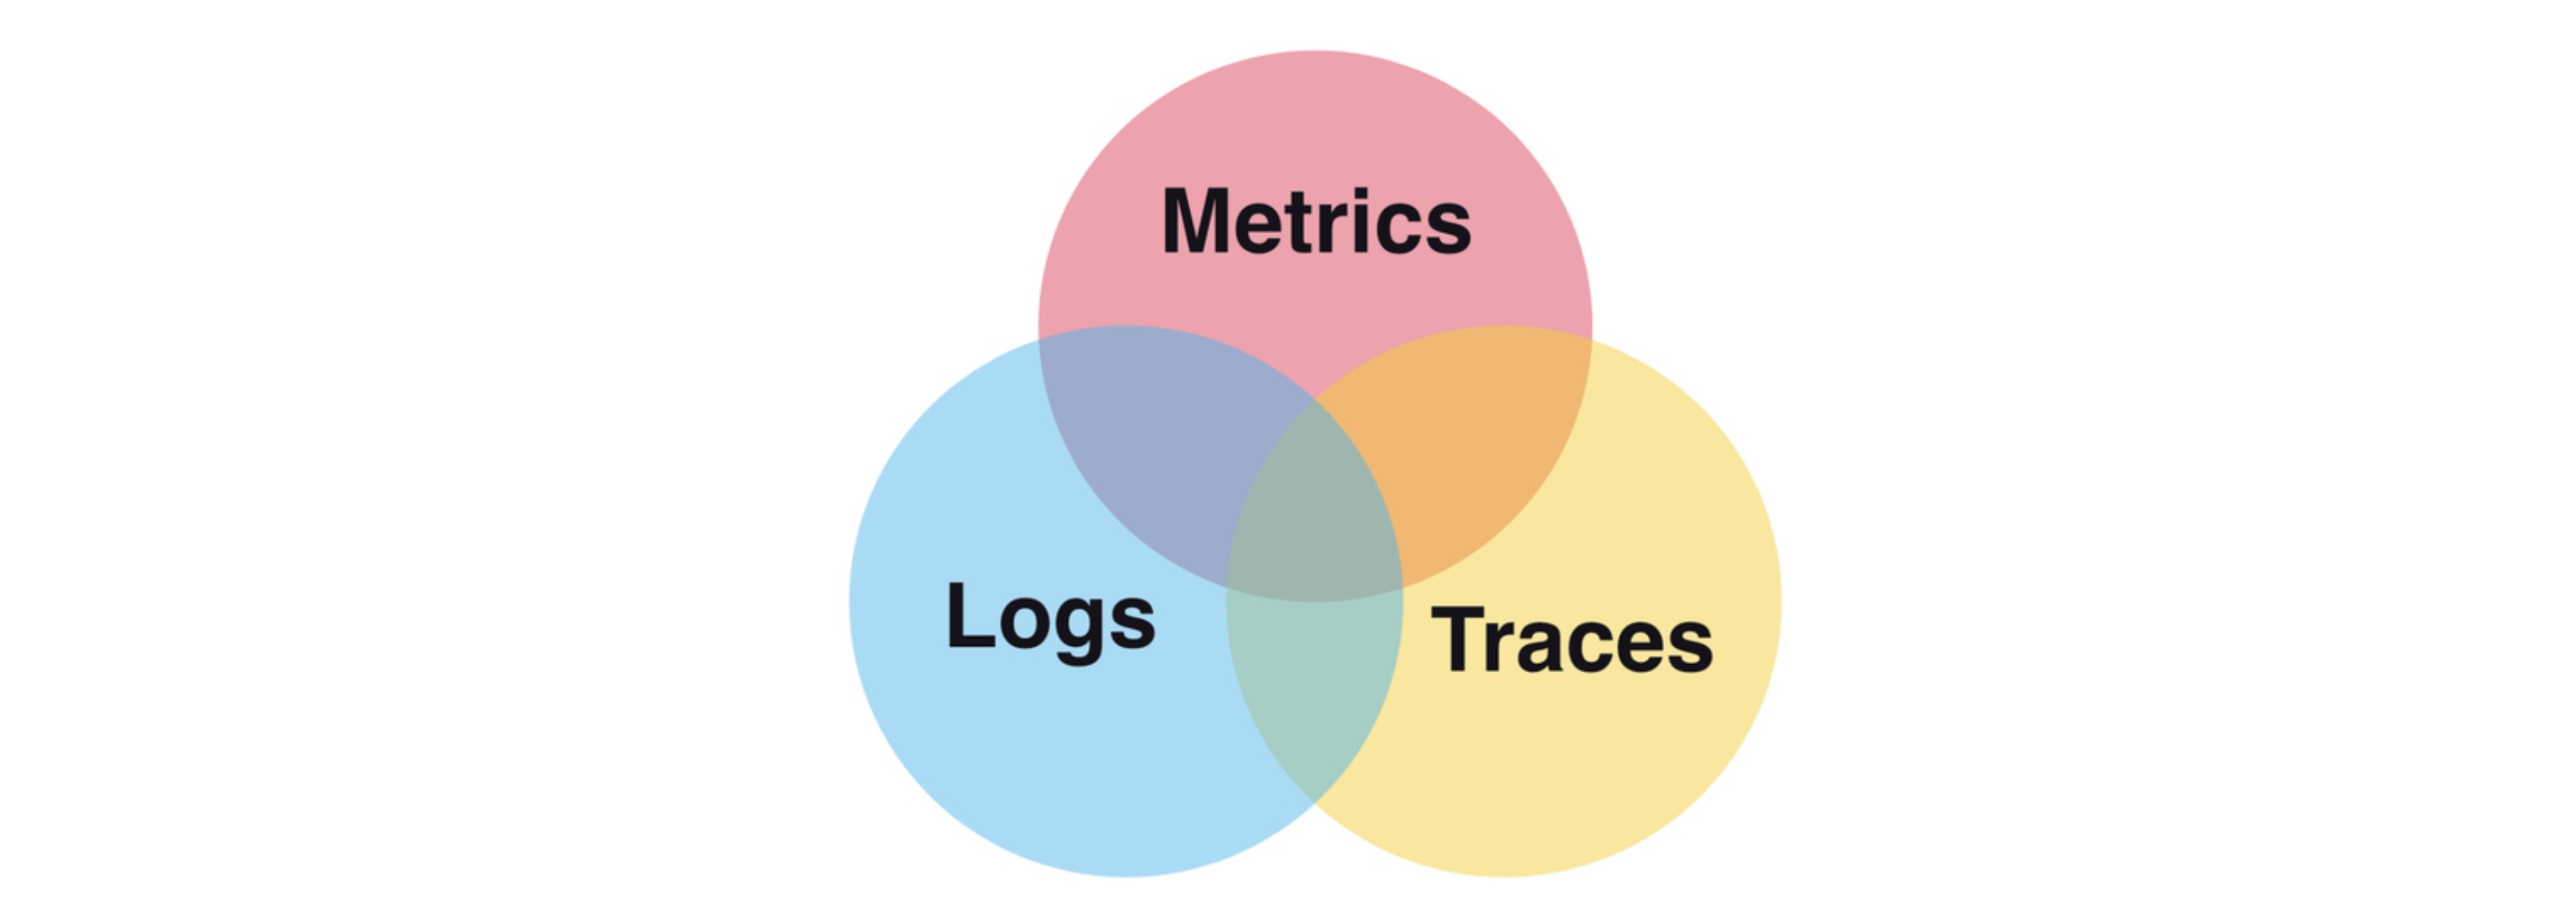 Logs, metrics, and traces